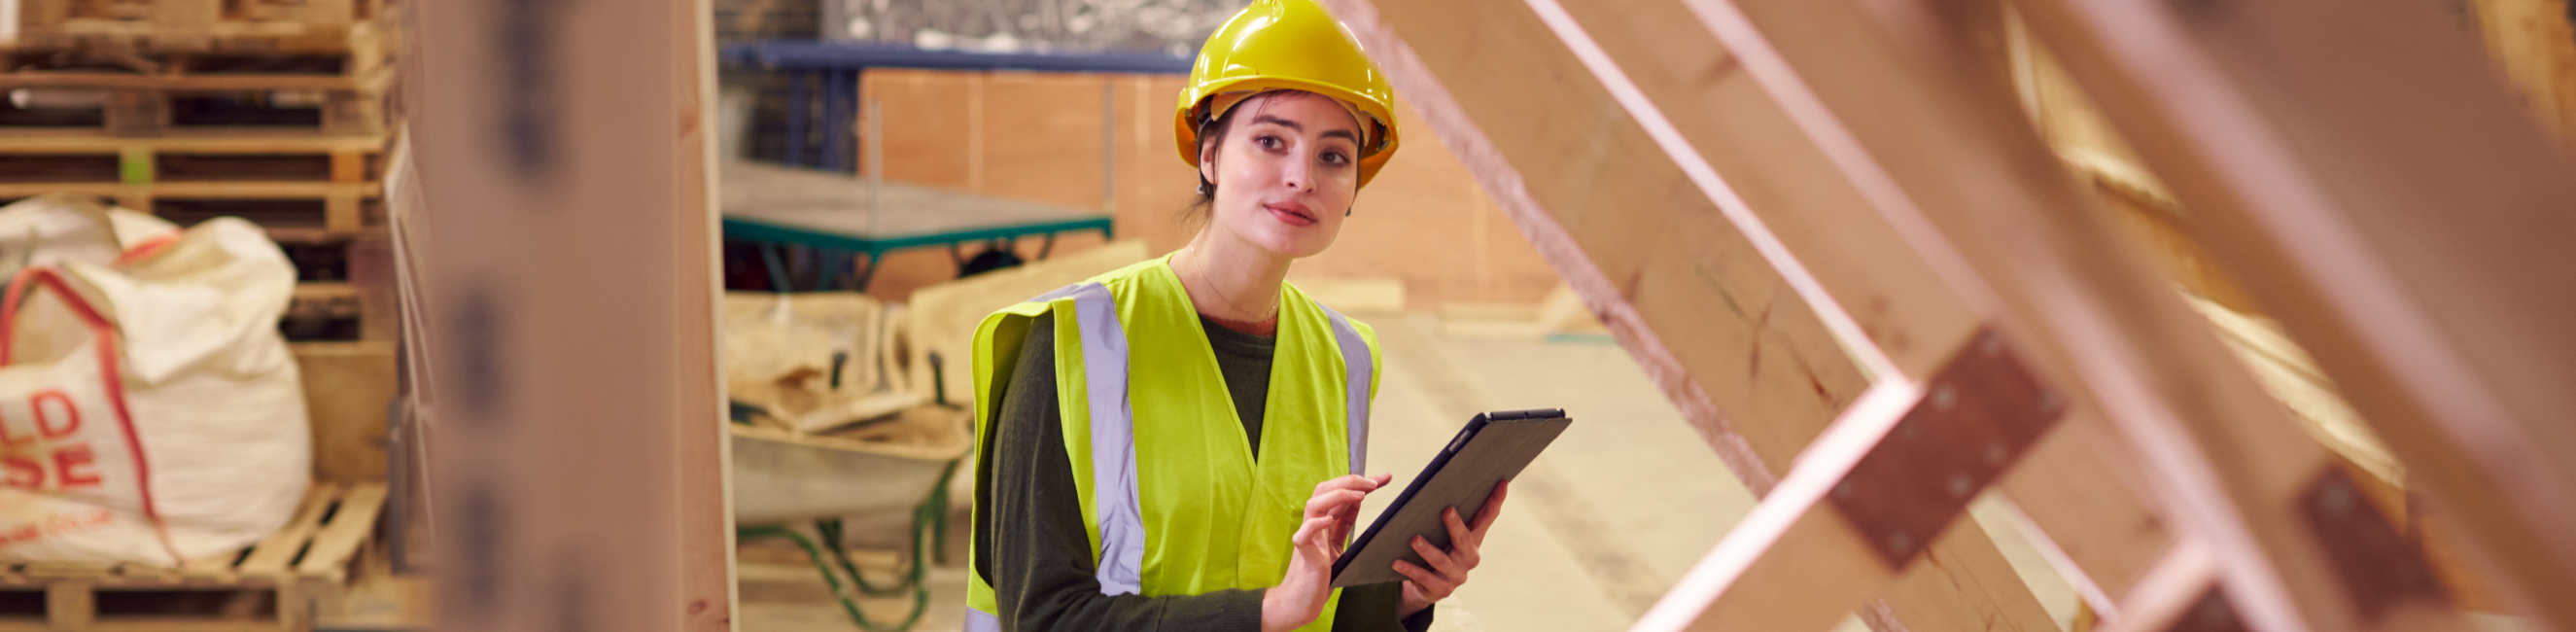 Female construction safety inspector on site